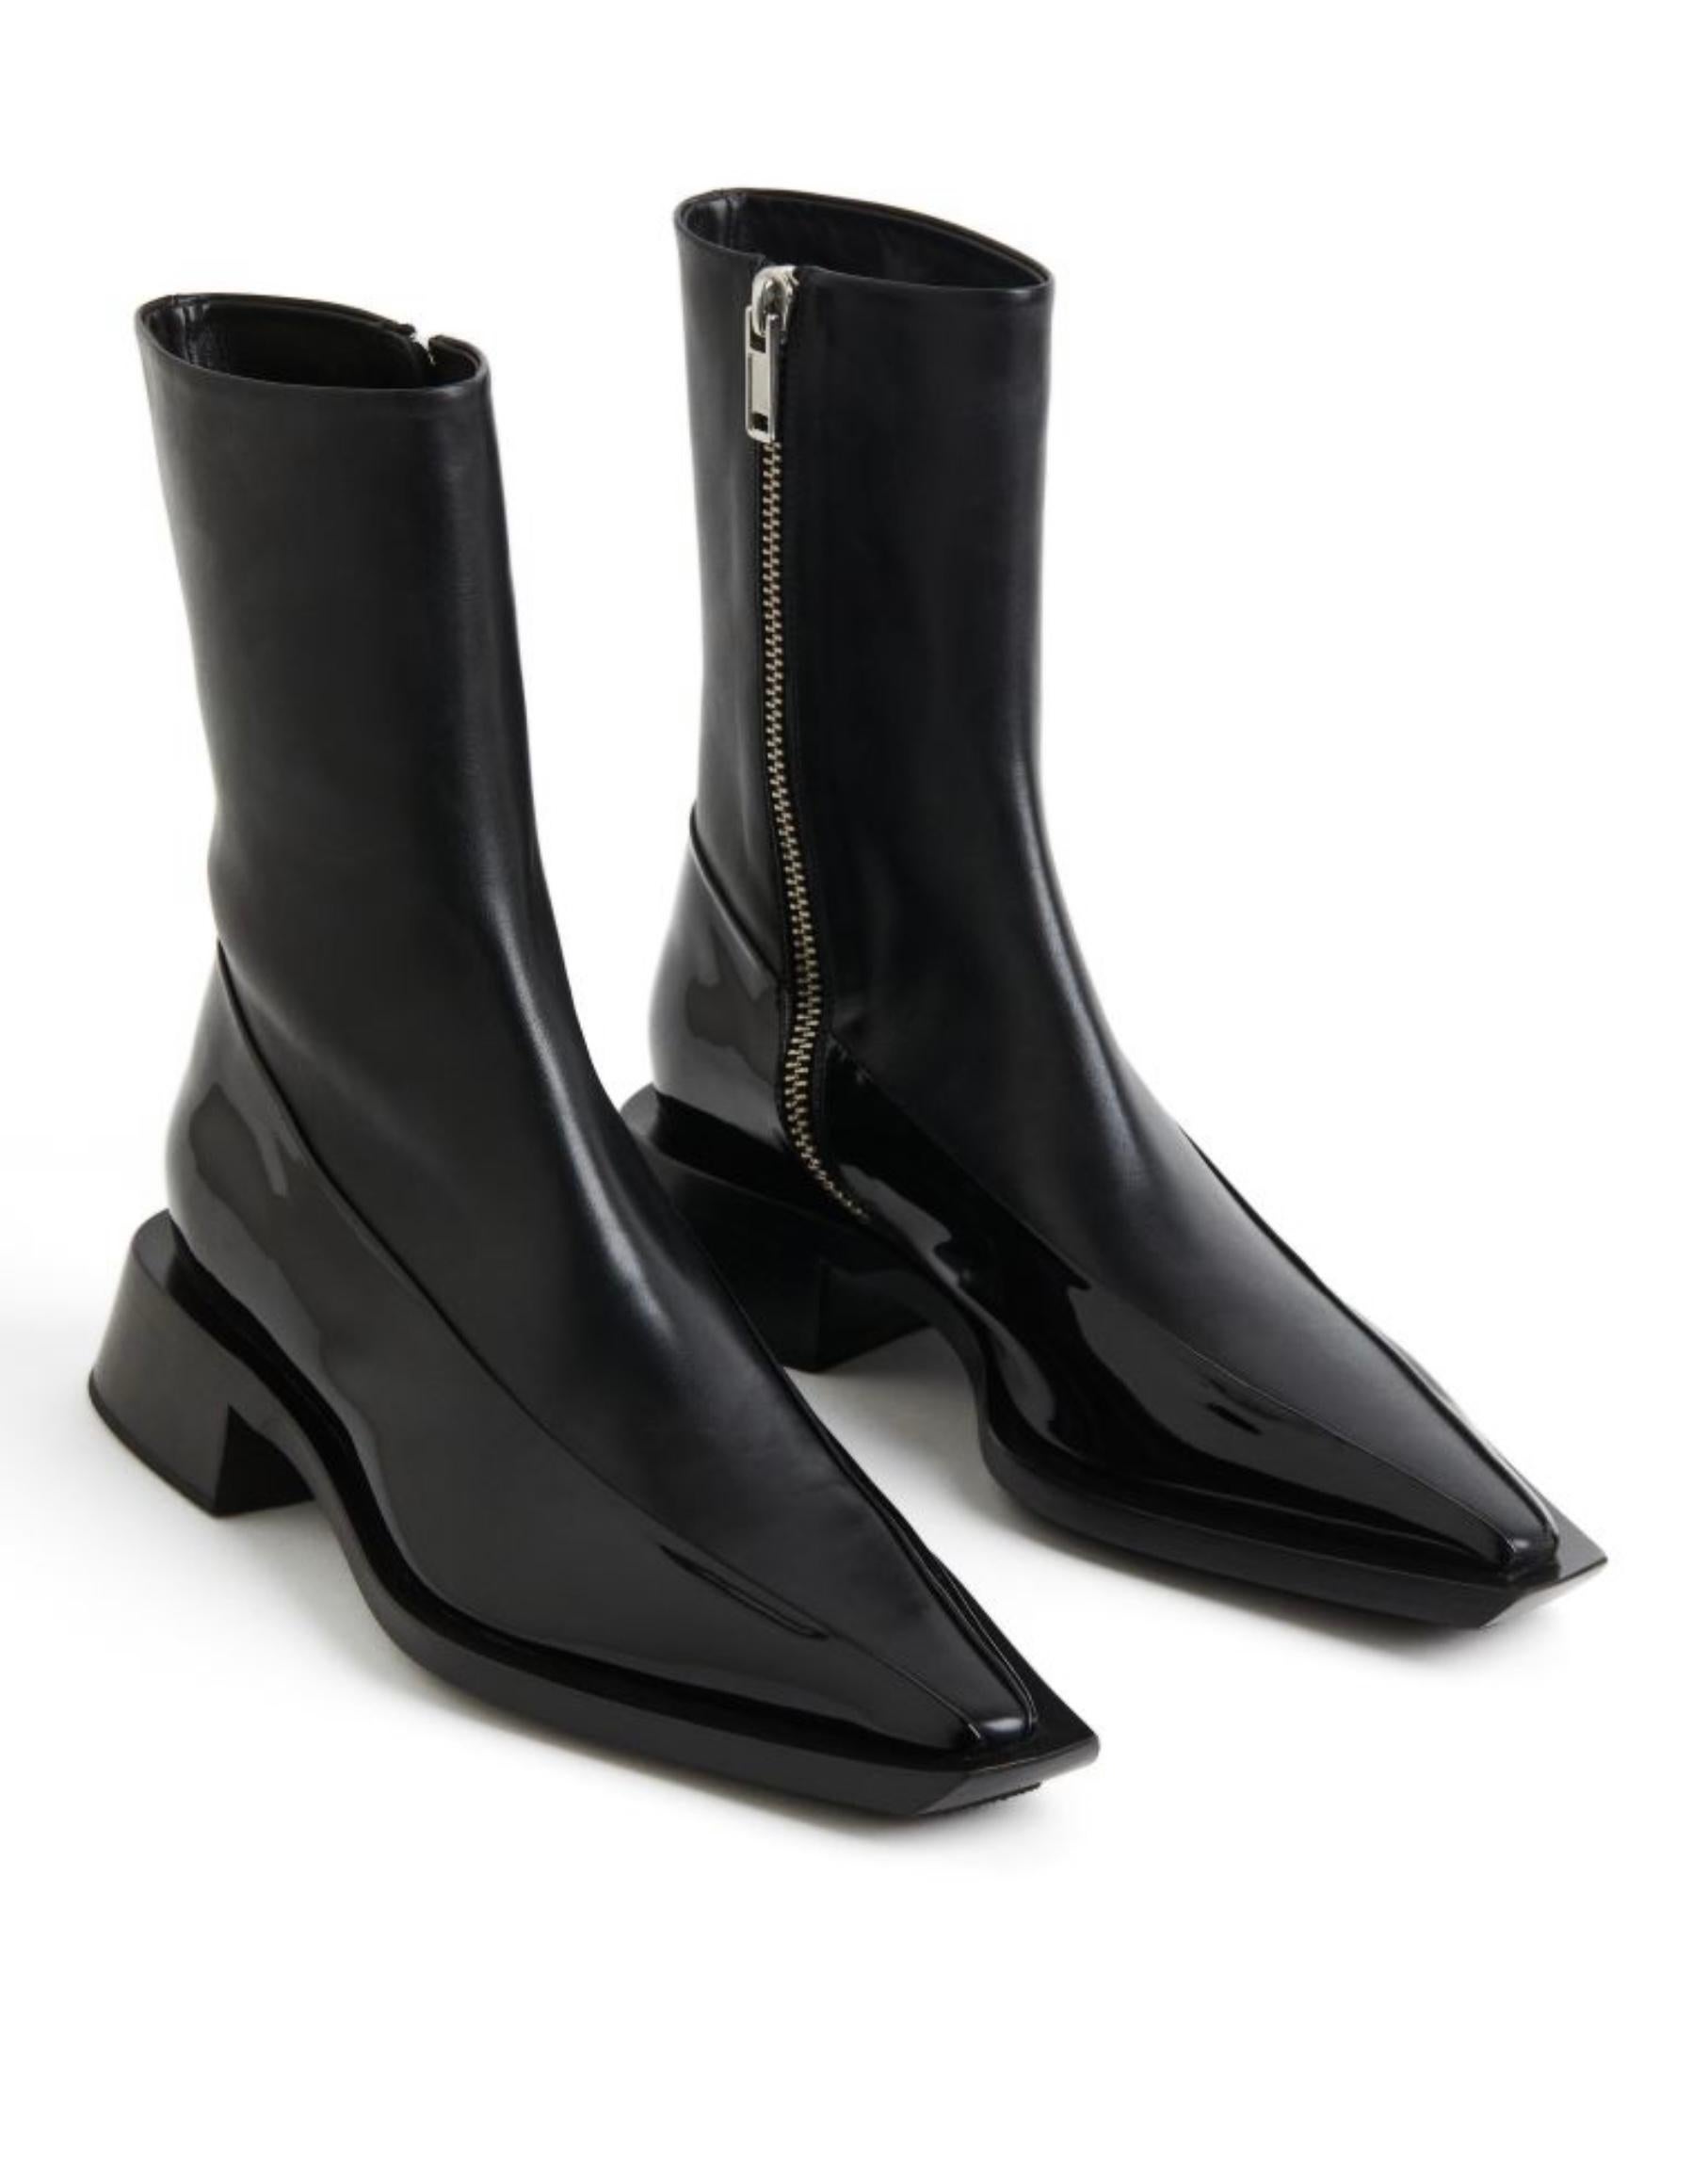 These beautiful Mugler H&M black ankle boots are the only footwear designed for this unique Limited edition 2023 Mugler x H&M collaboration where these and other key pieces sold out within 20 minutes of the launch date.

In Mugler’s late